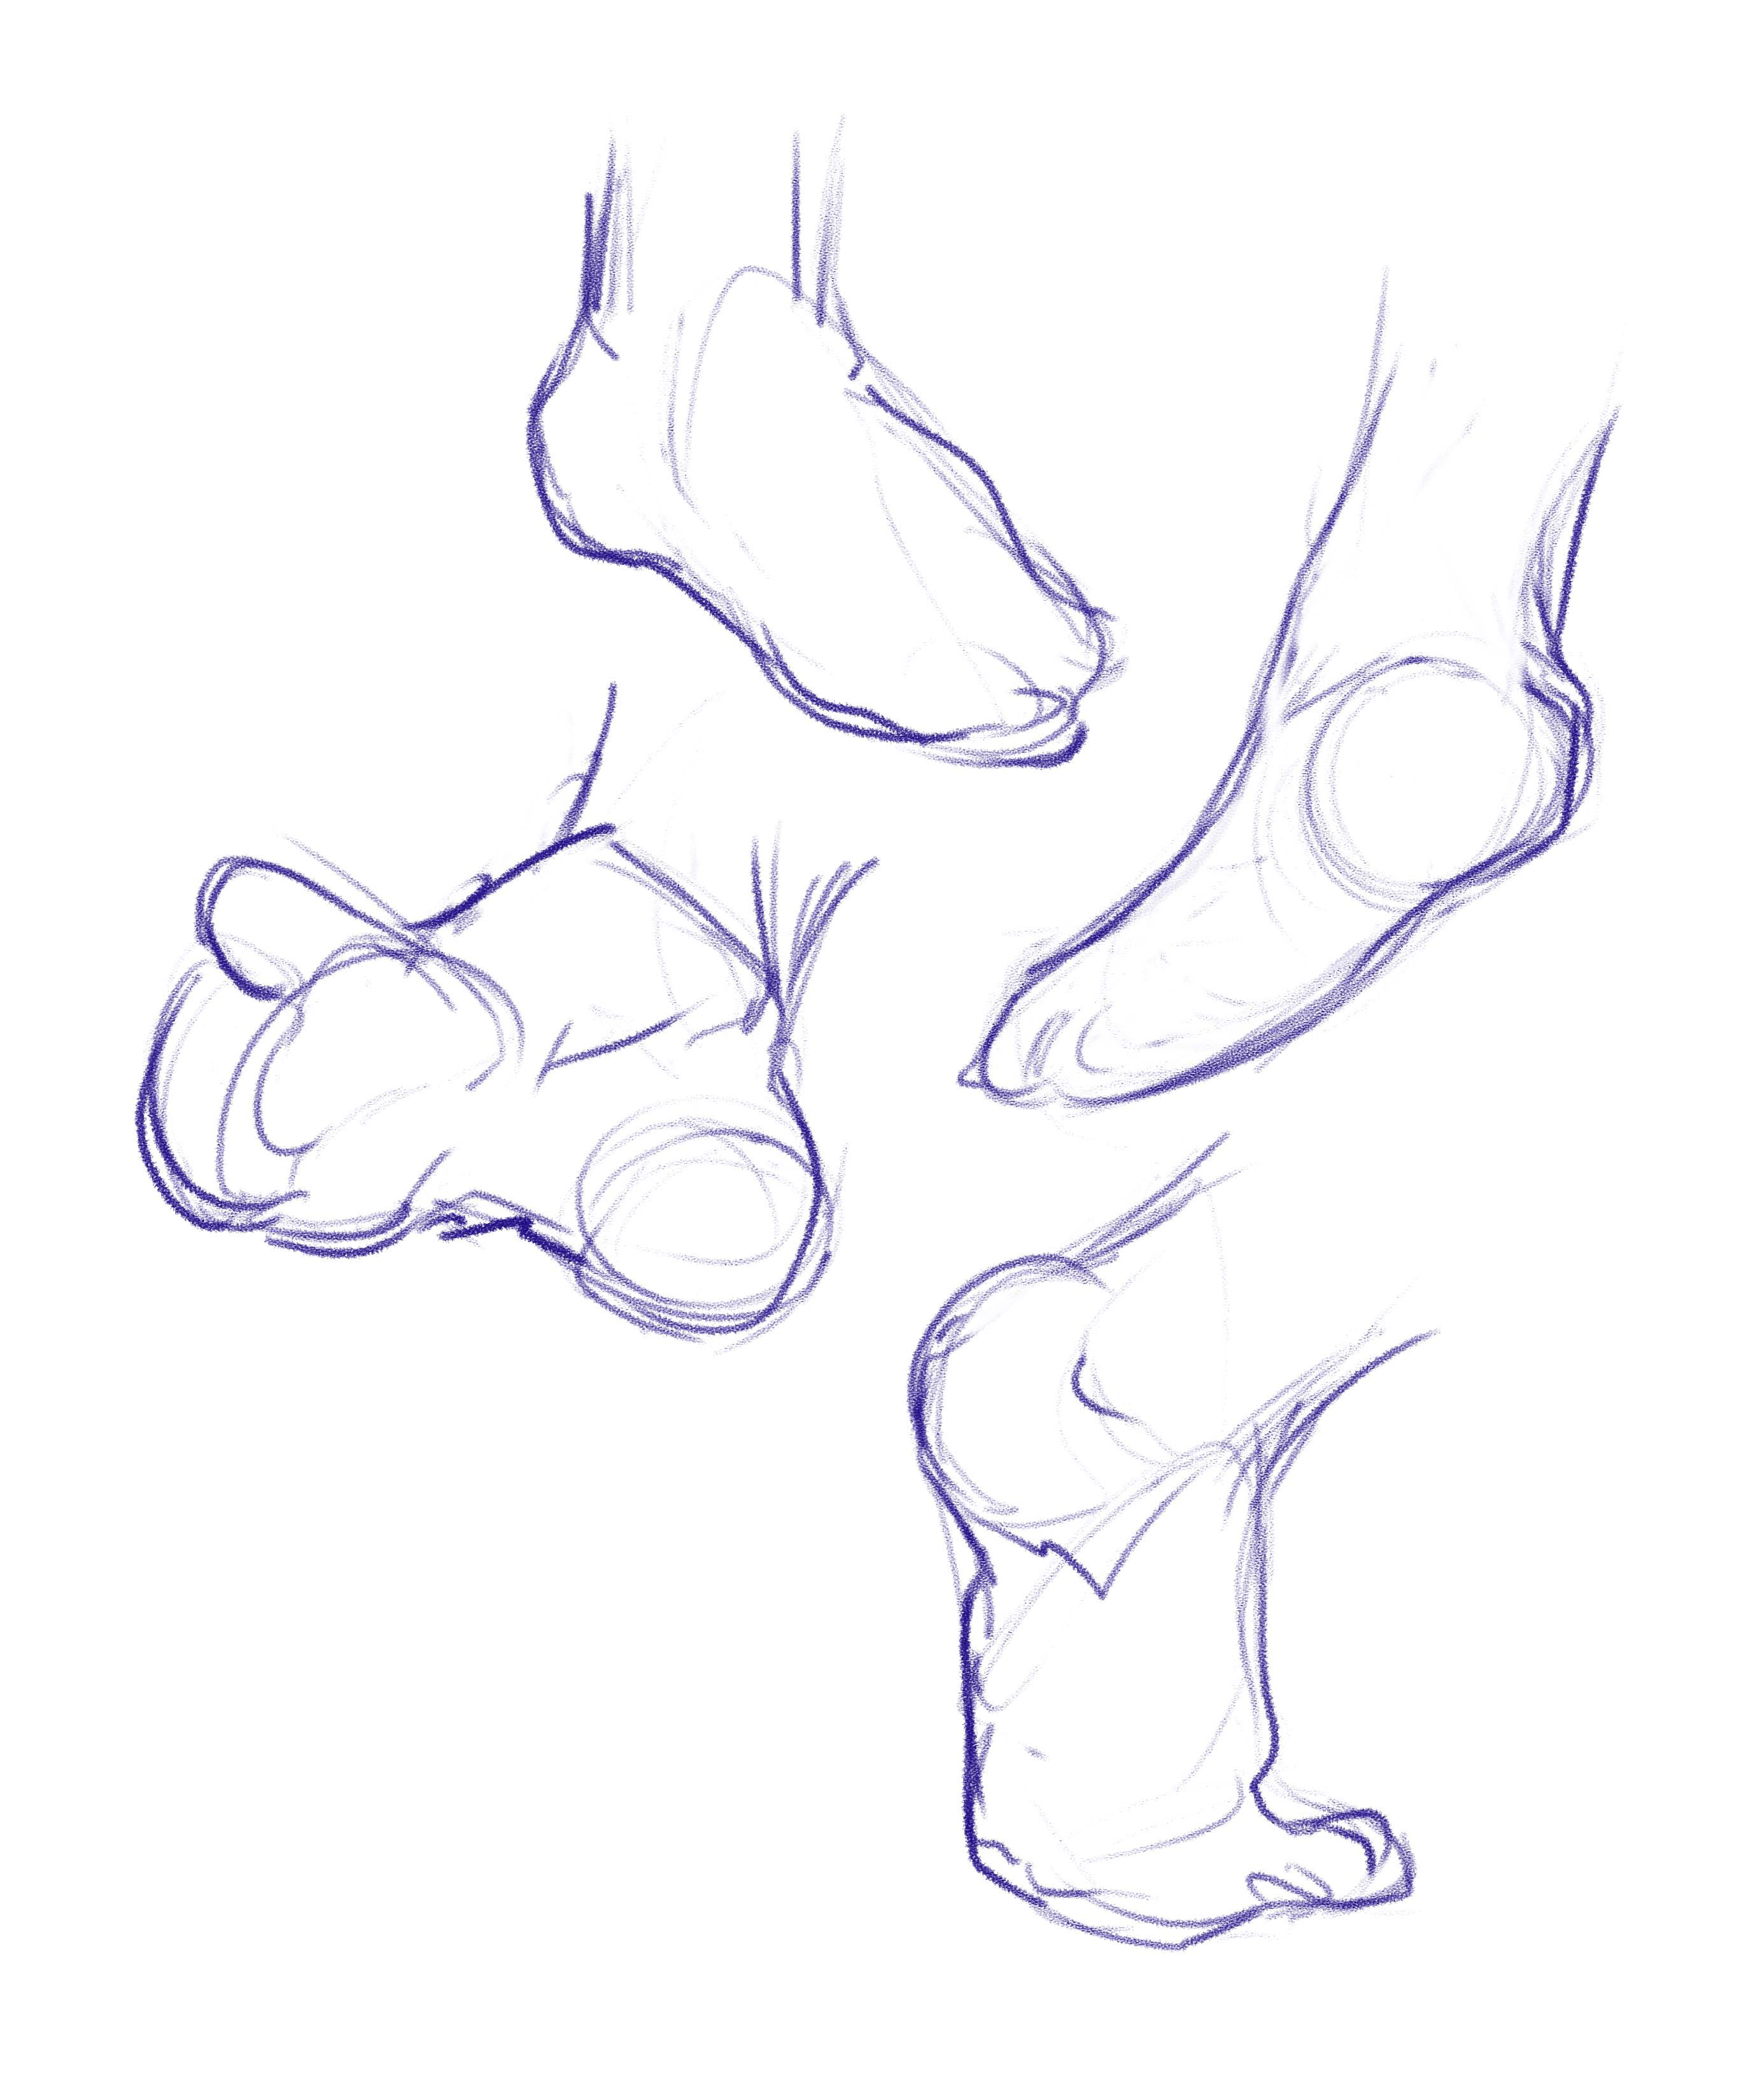 How to draw feet